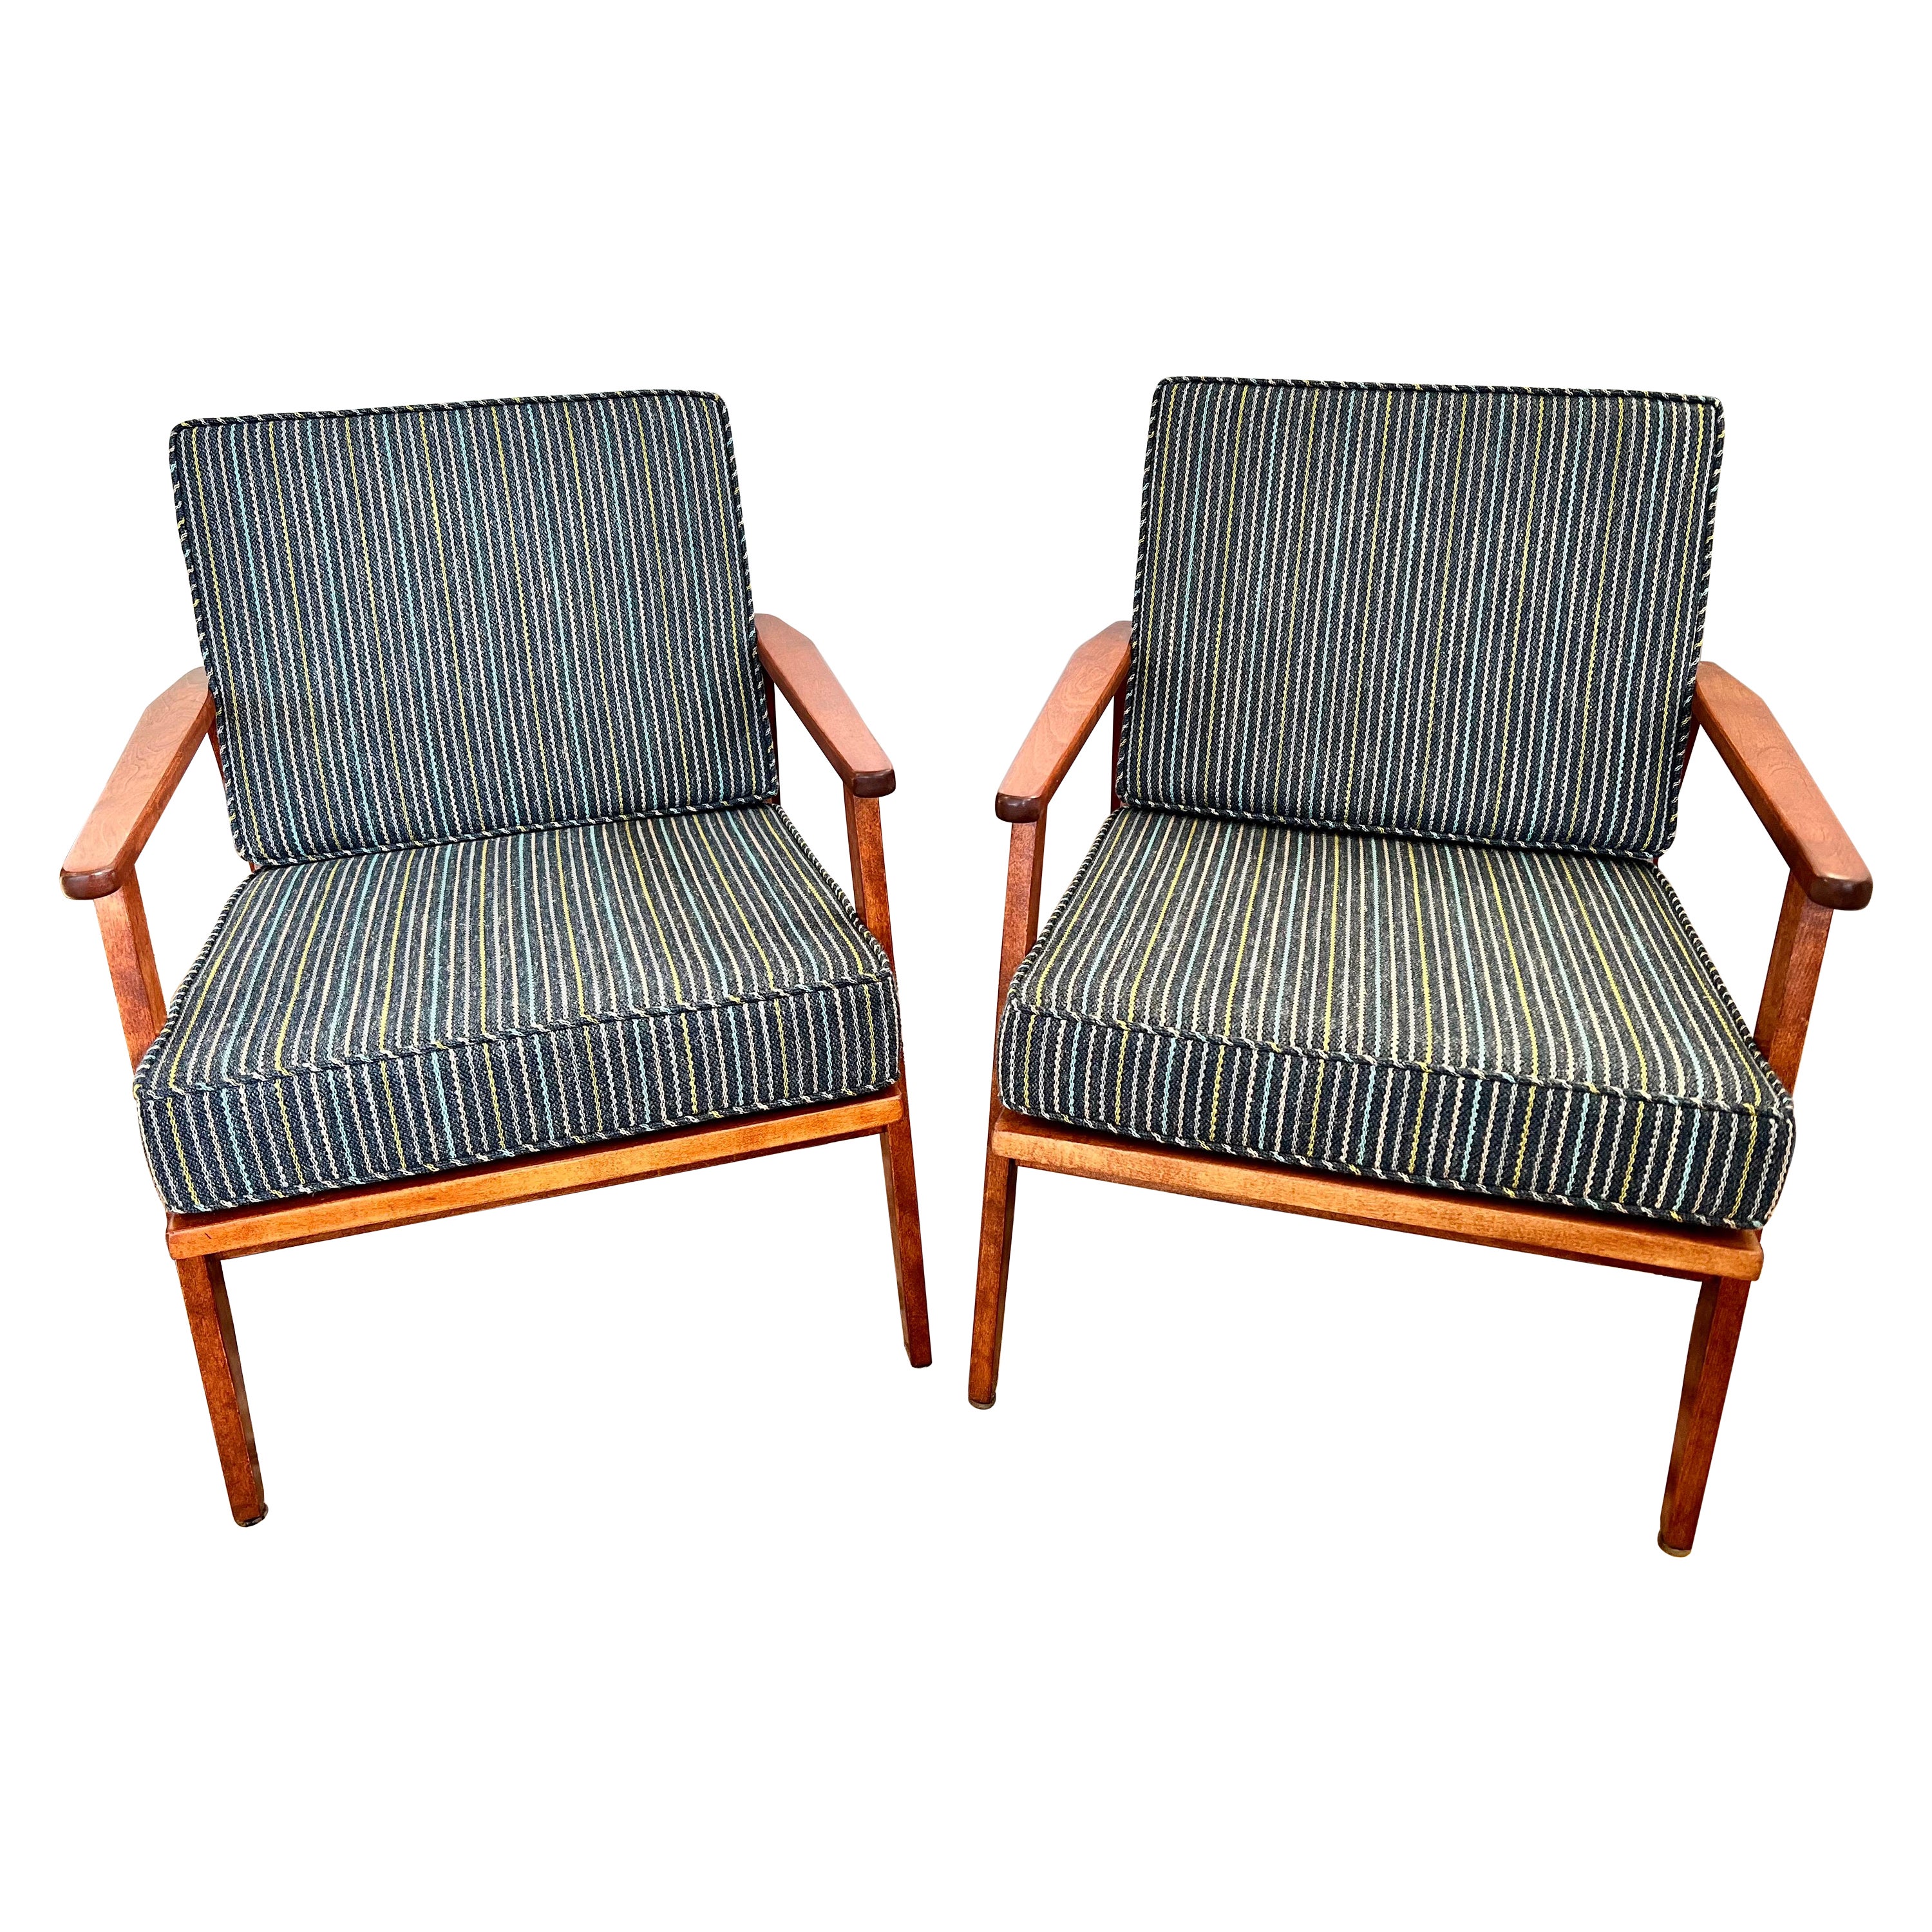 Matching Pair of Newly Upholstered Mid-Century Modern Lounge Chairs